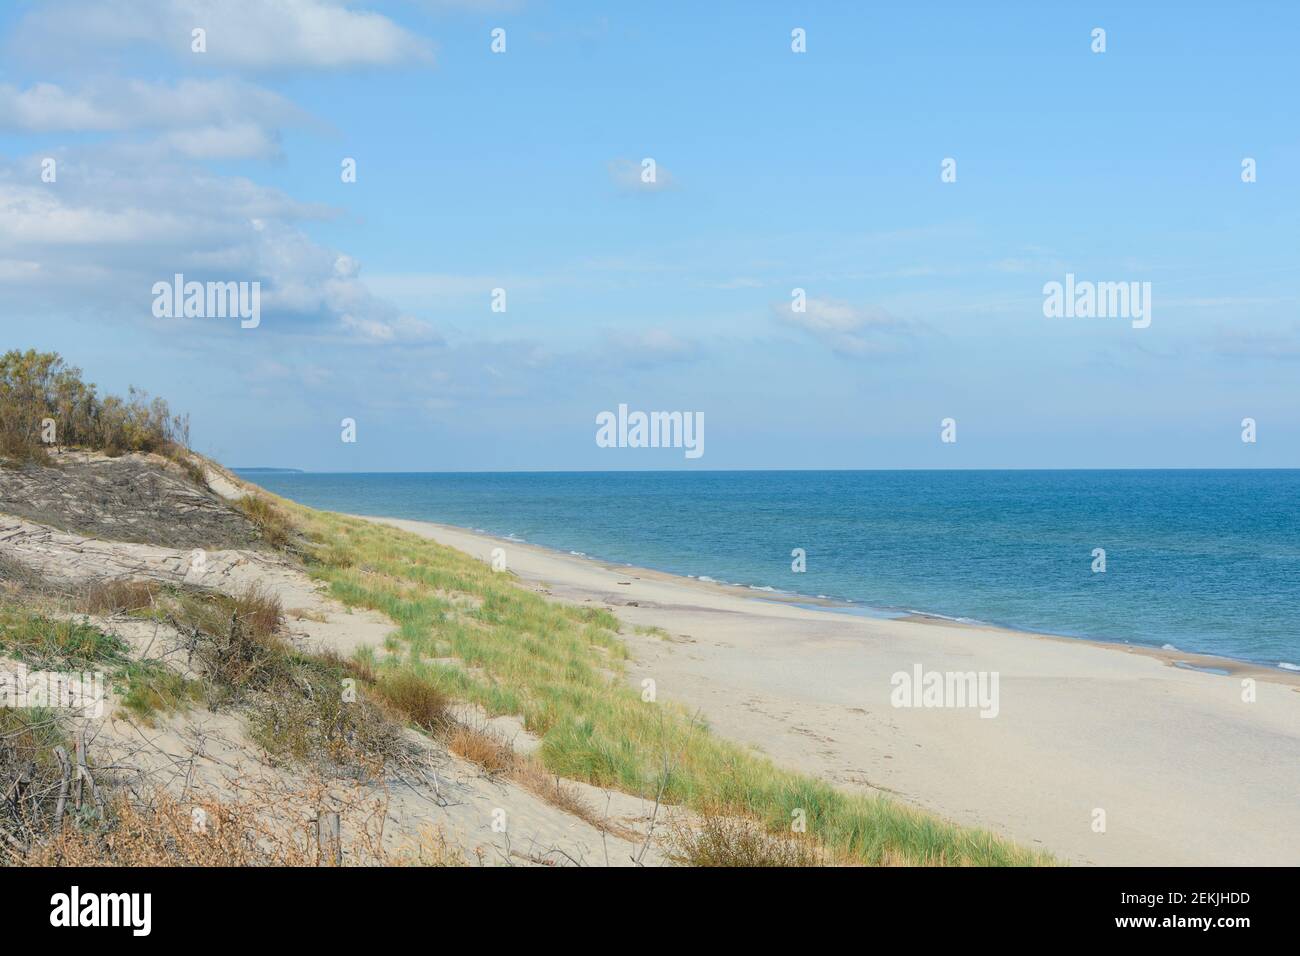 White sand beach on Baltic Sea coast. National Park Curonian Spit. Stock Photo